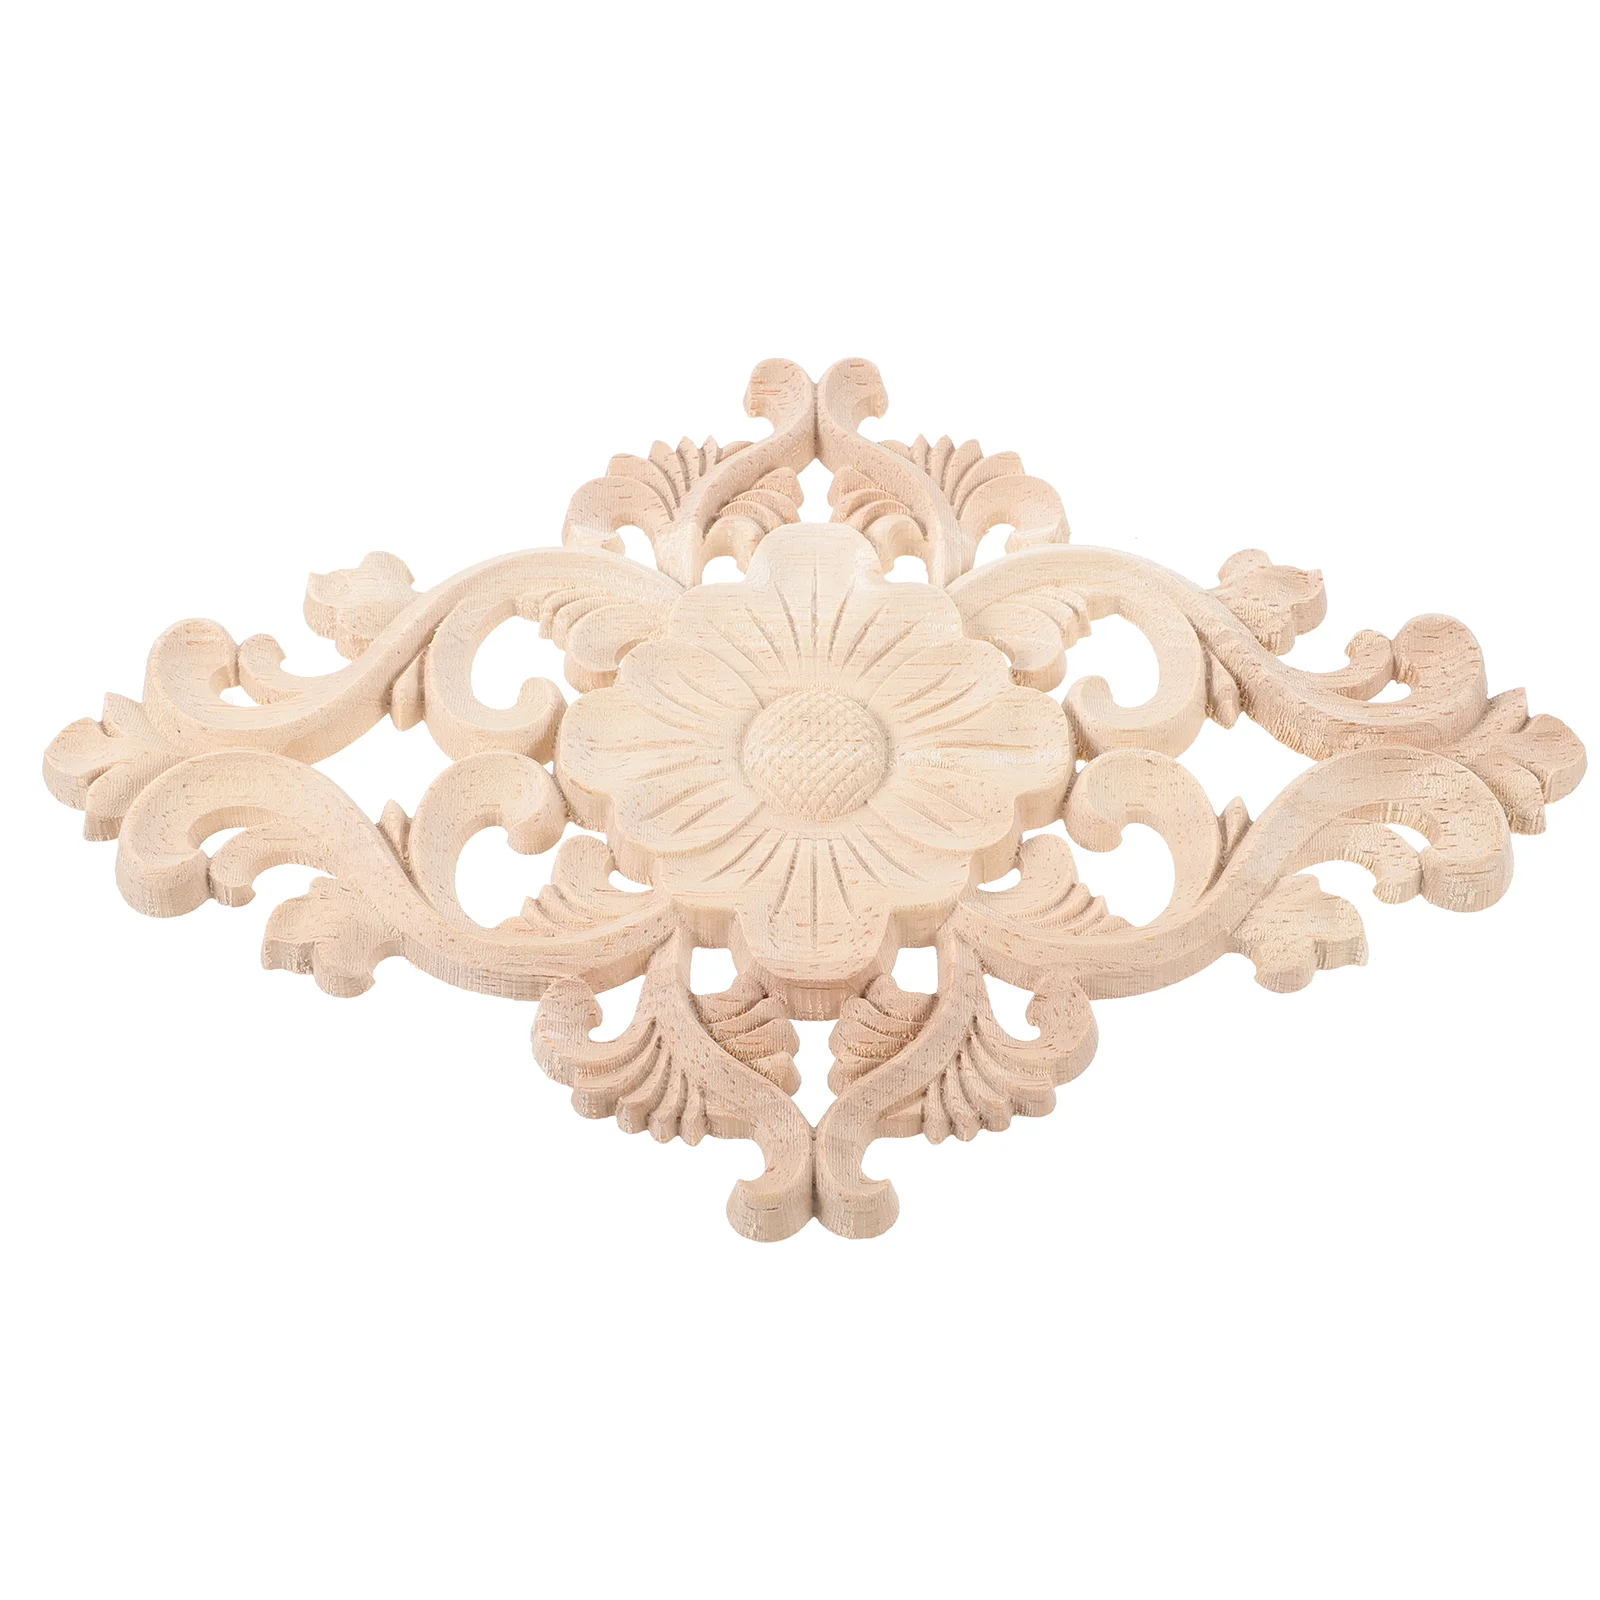 

European Wood Carving Wall Appliques Onlays Scrapbook Embellishments Furniture Decorative Flowers Carved